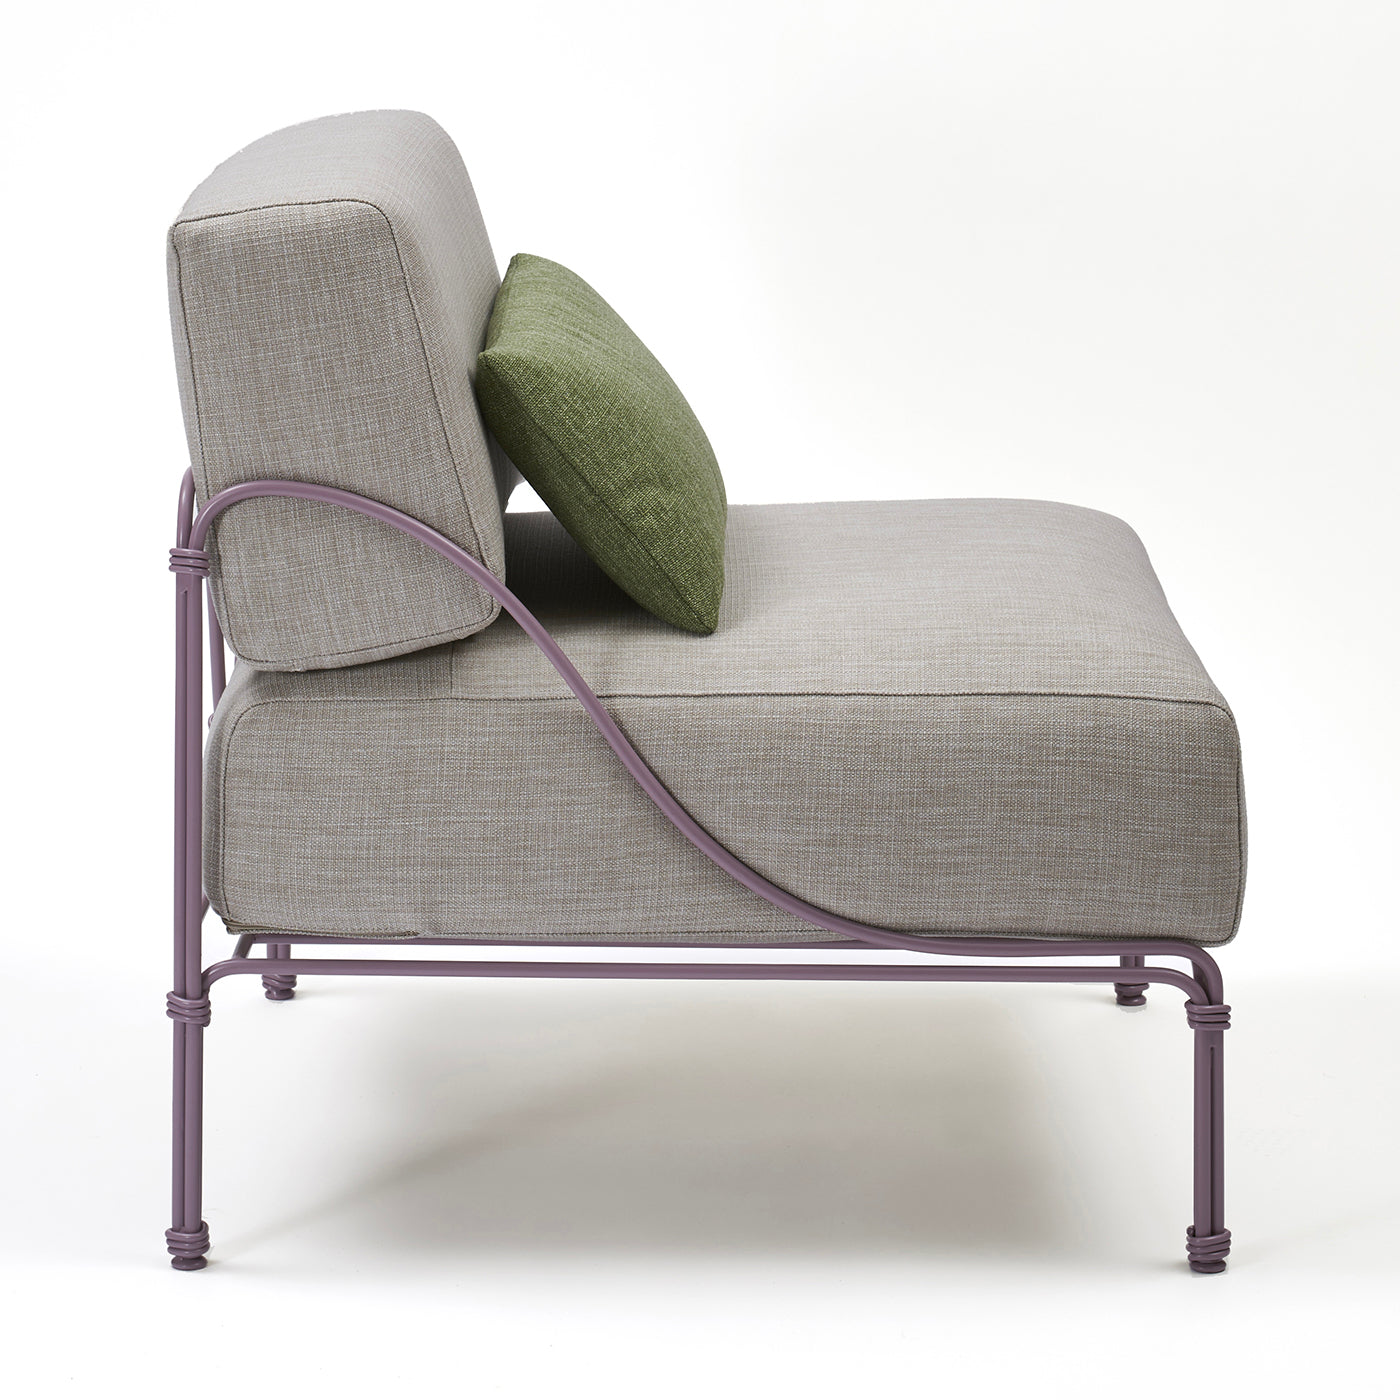 Vitis Lilac and Gray Armchair by Ciarmroli Queda Studio in Stainless Steel - Alternative view 1